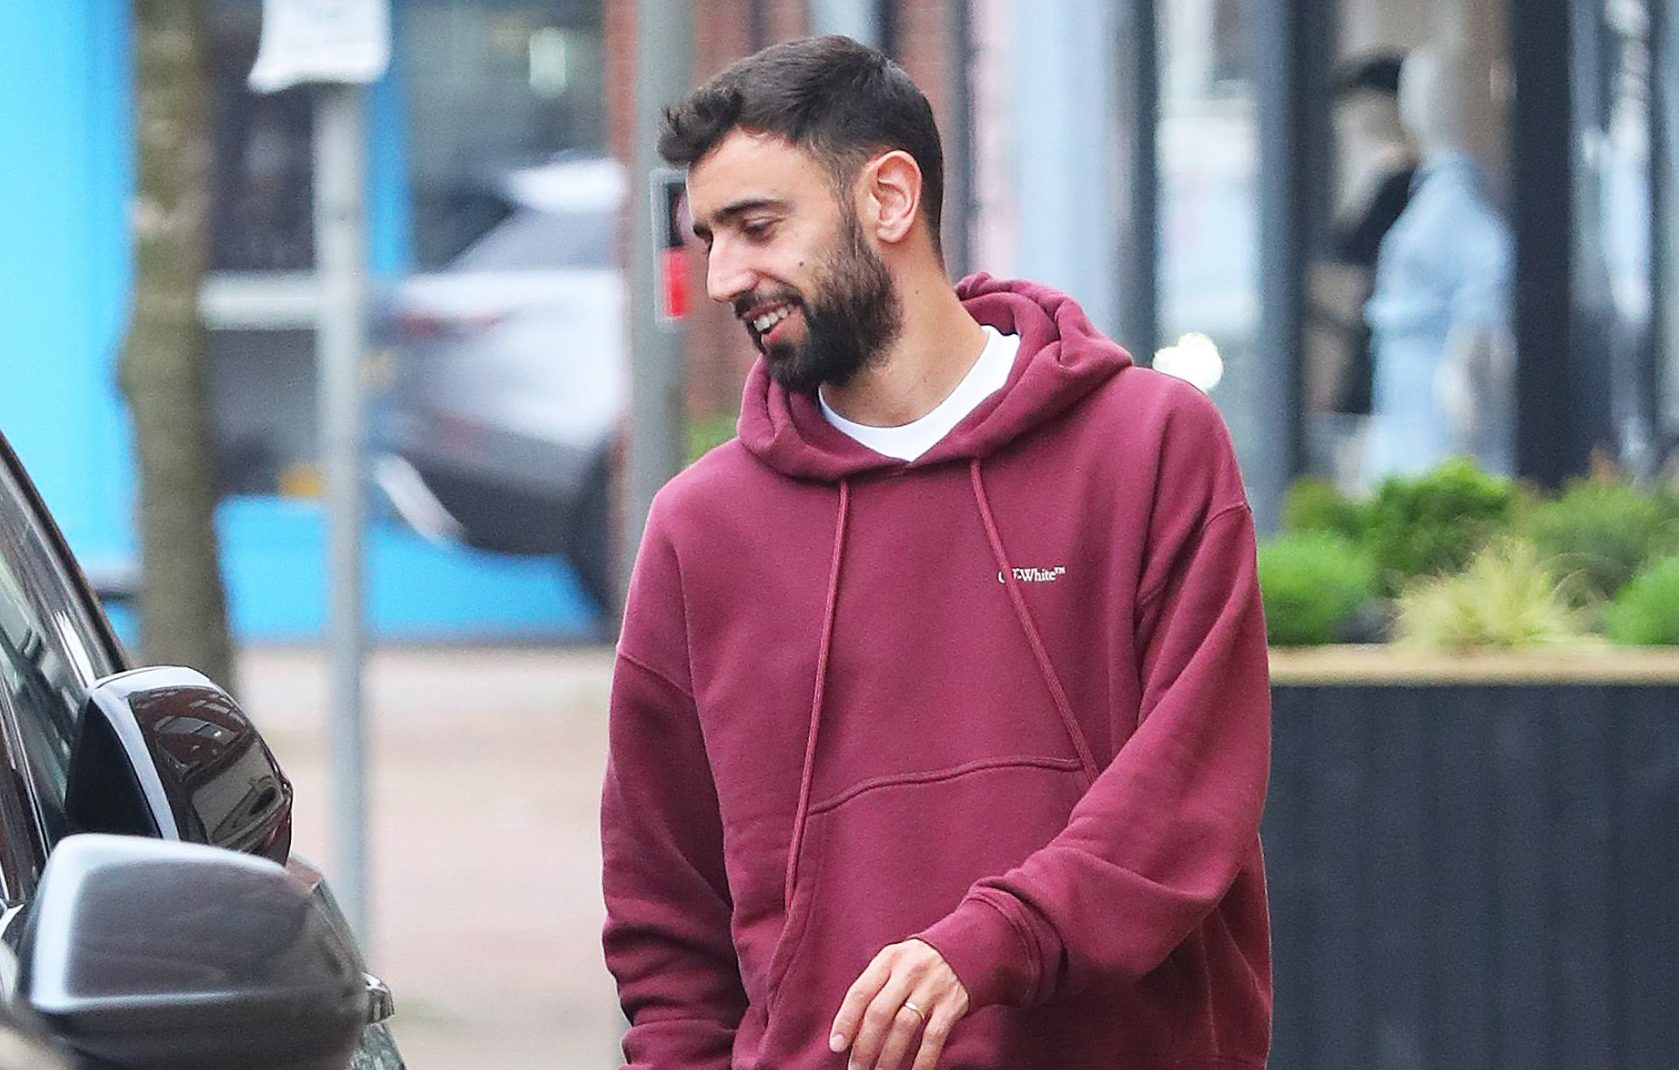 man utd injury doubt bruno fernandes pictured wearing a protective cast